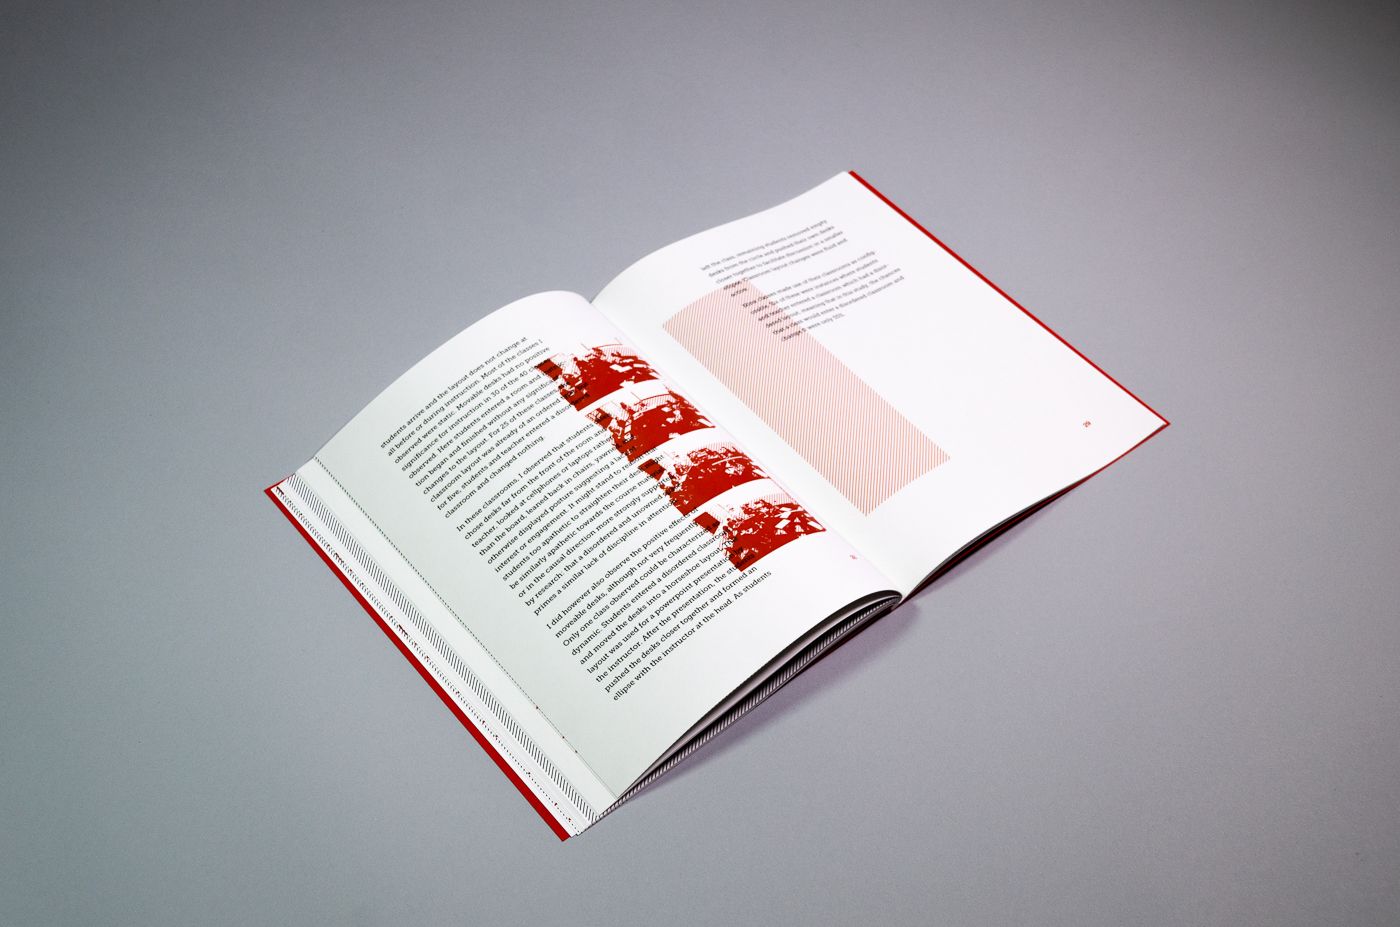 A spread with red photos printed in the inside margin.